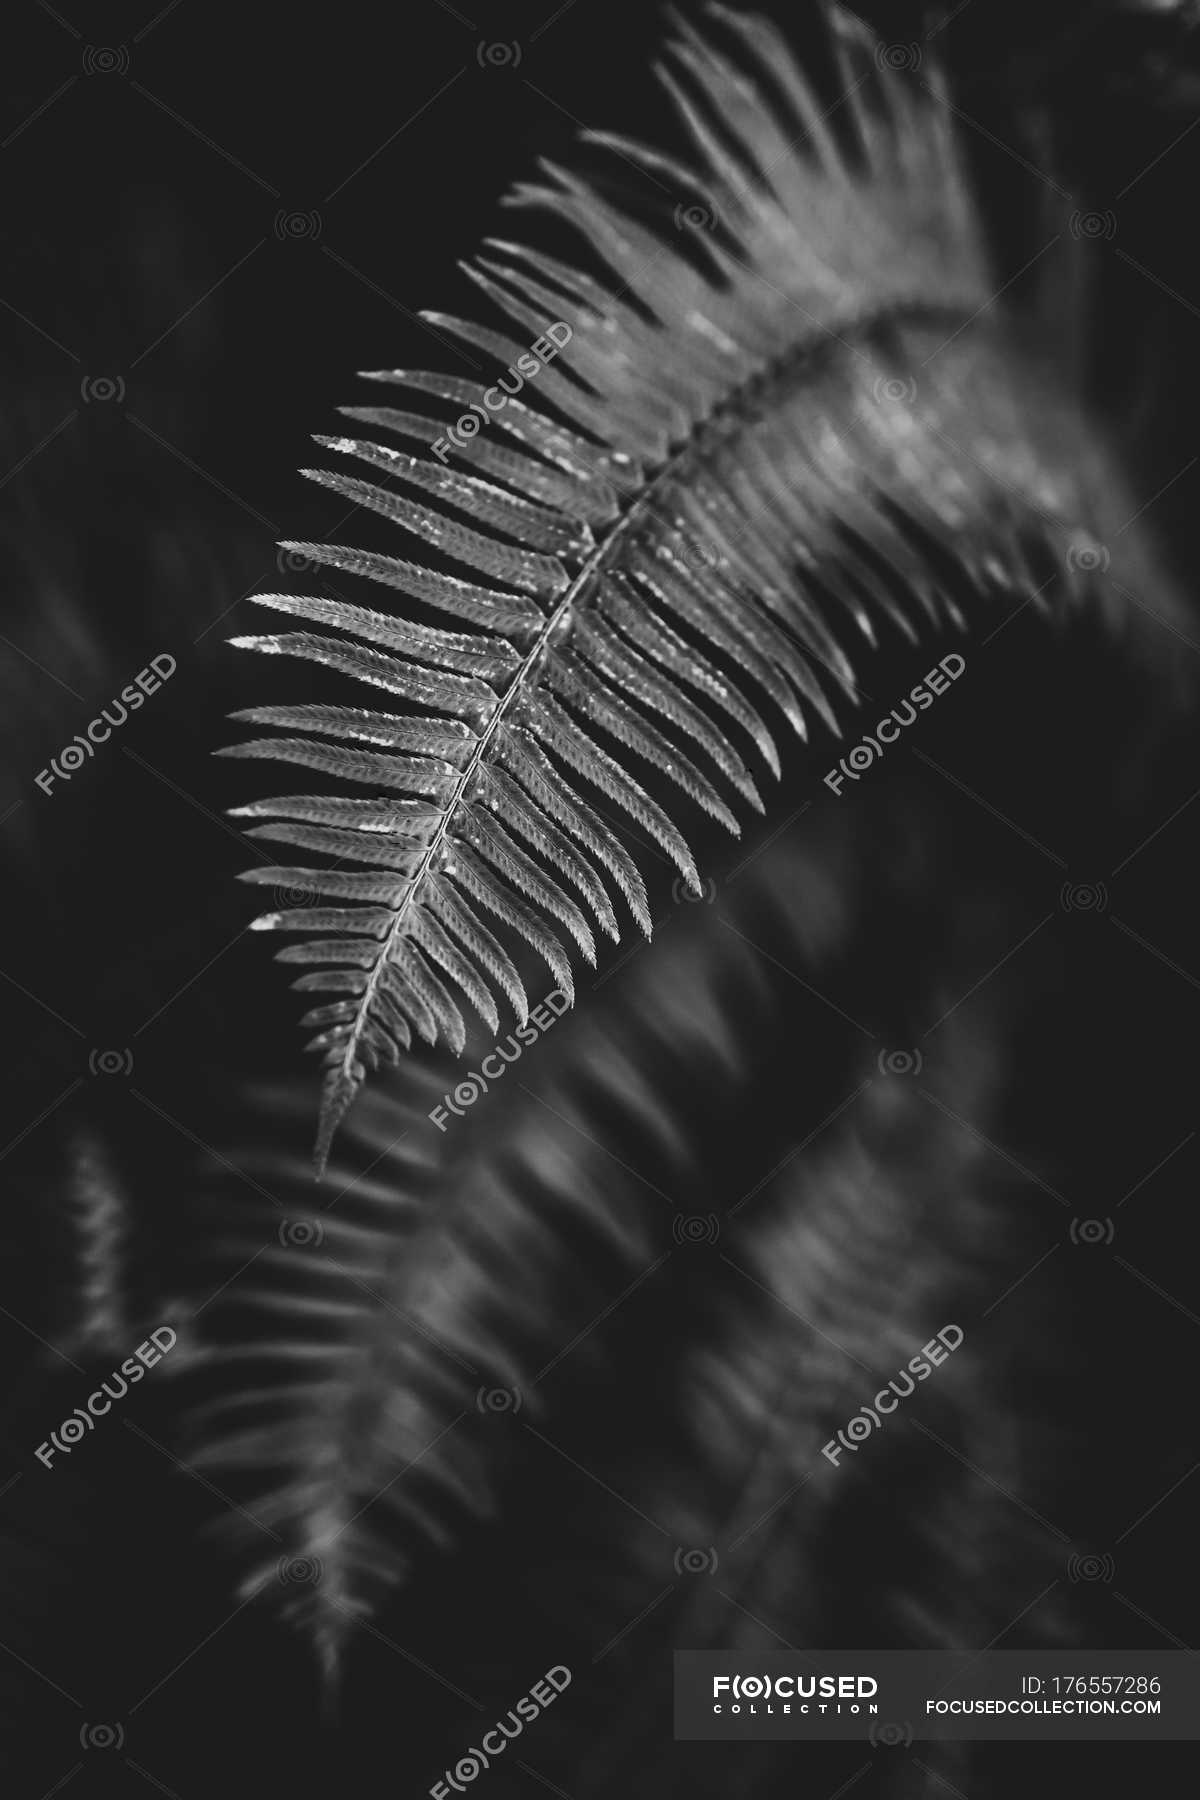 View of fern leave on dark blurred background , black and white image —  plant, growing - Stock Photo | #176557286